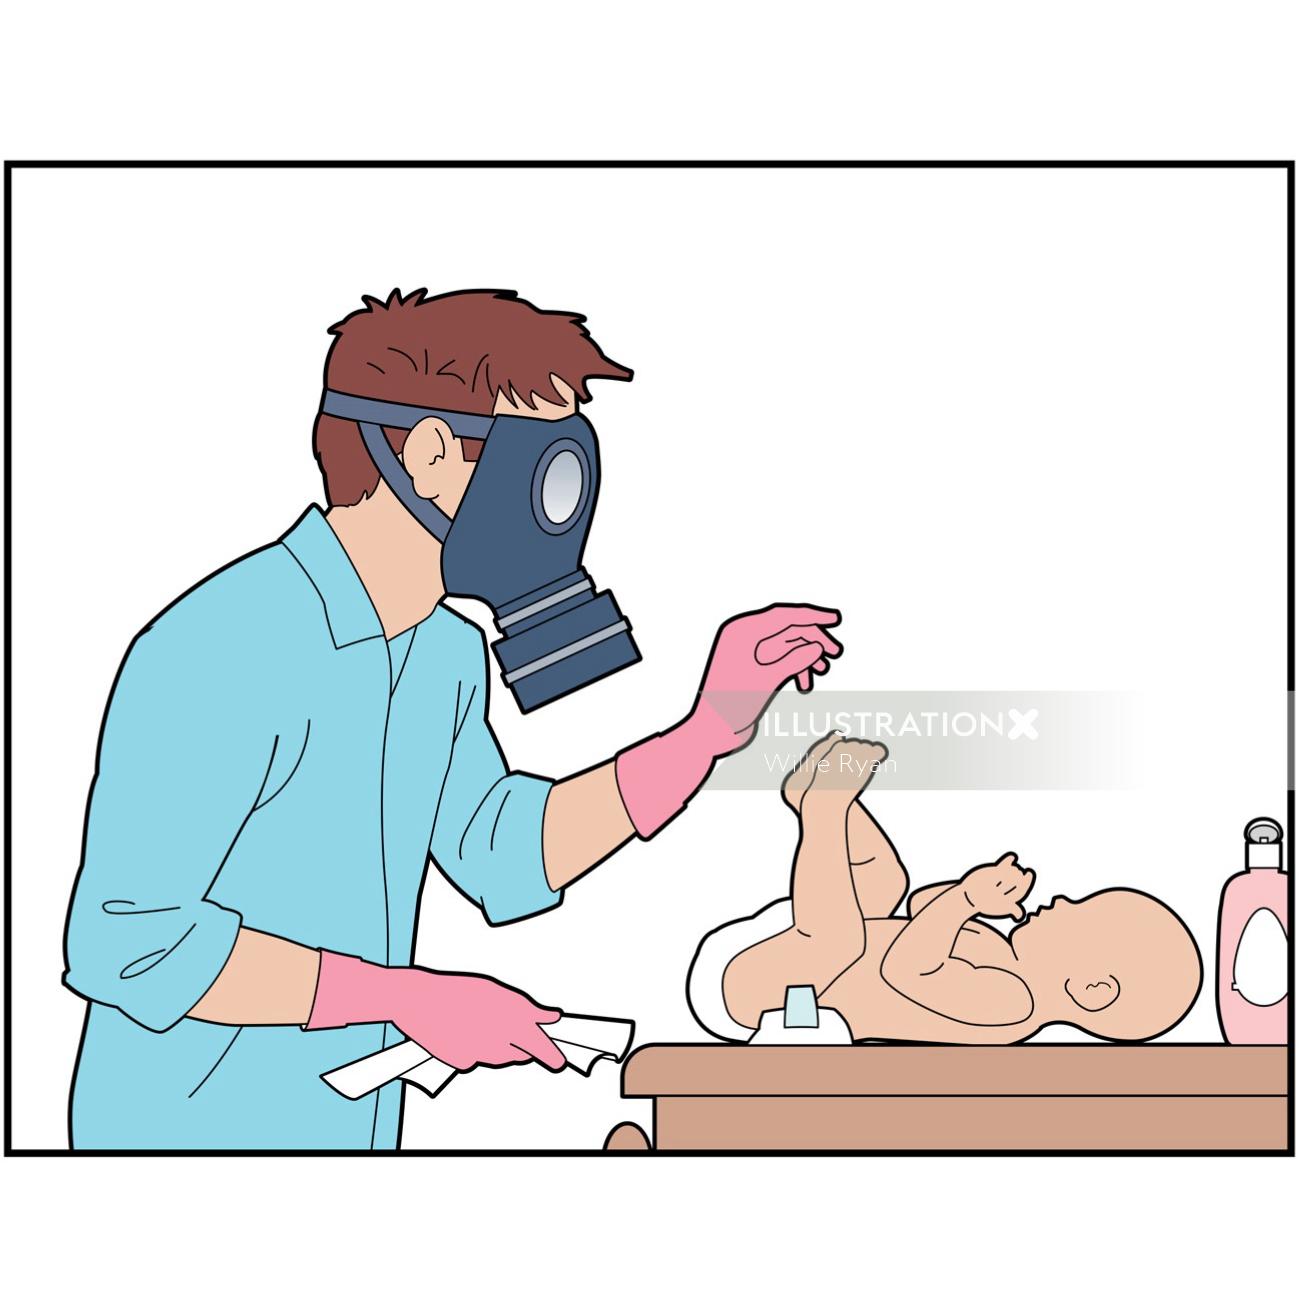 changing diaper of a baby illustration